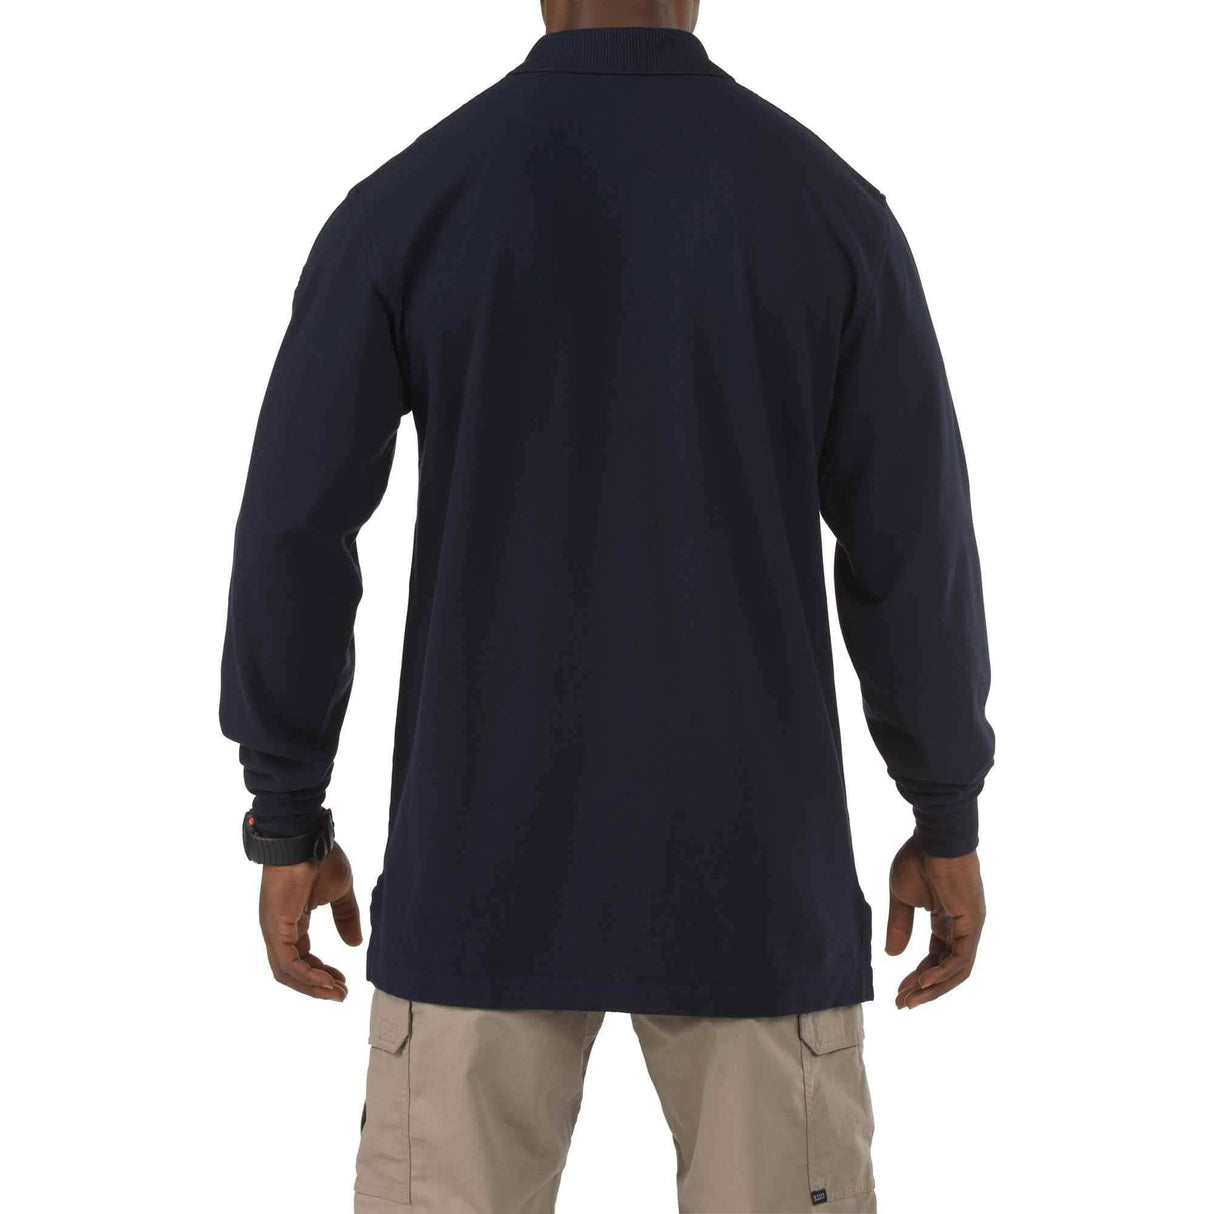 PROFESSIONAL LONG SLEEVE POLO - 5.11 Tactical Finland